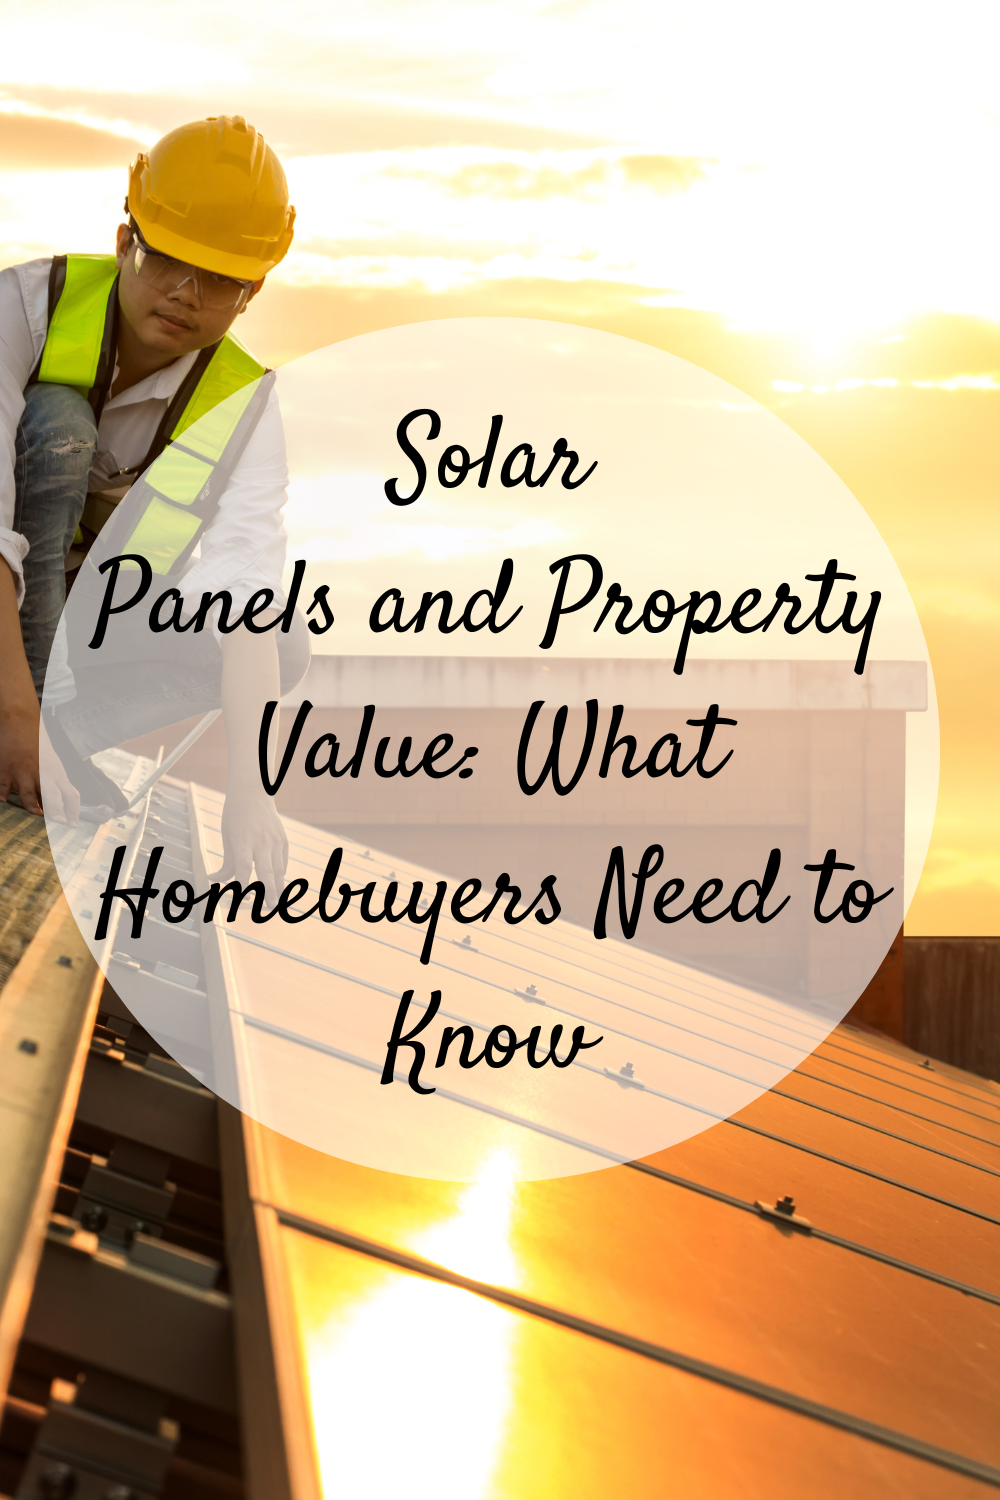 Solar Panels and Property Value: What Homebuyers Need to Know